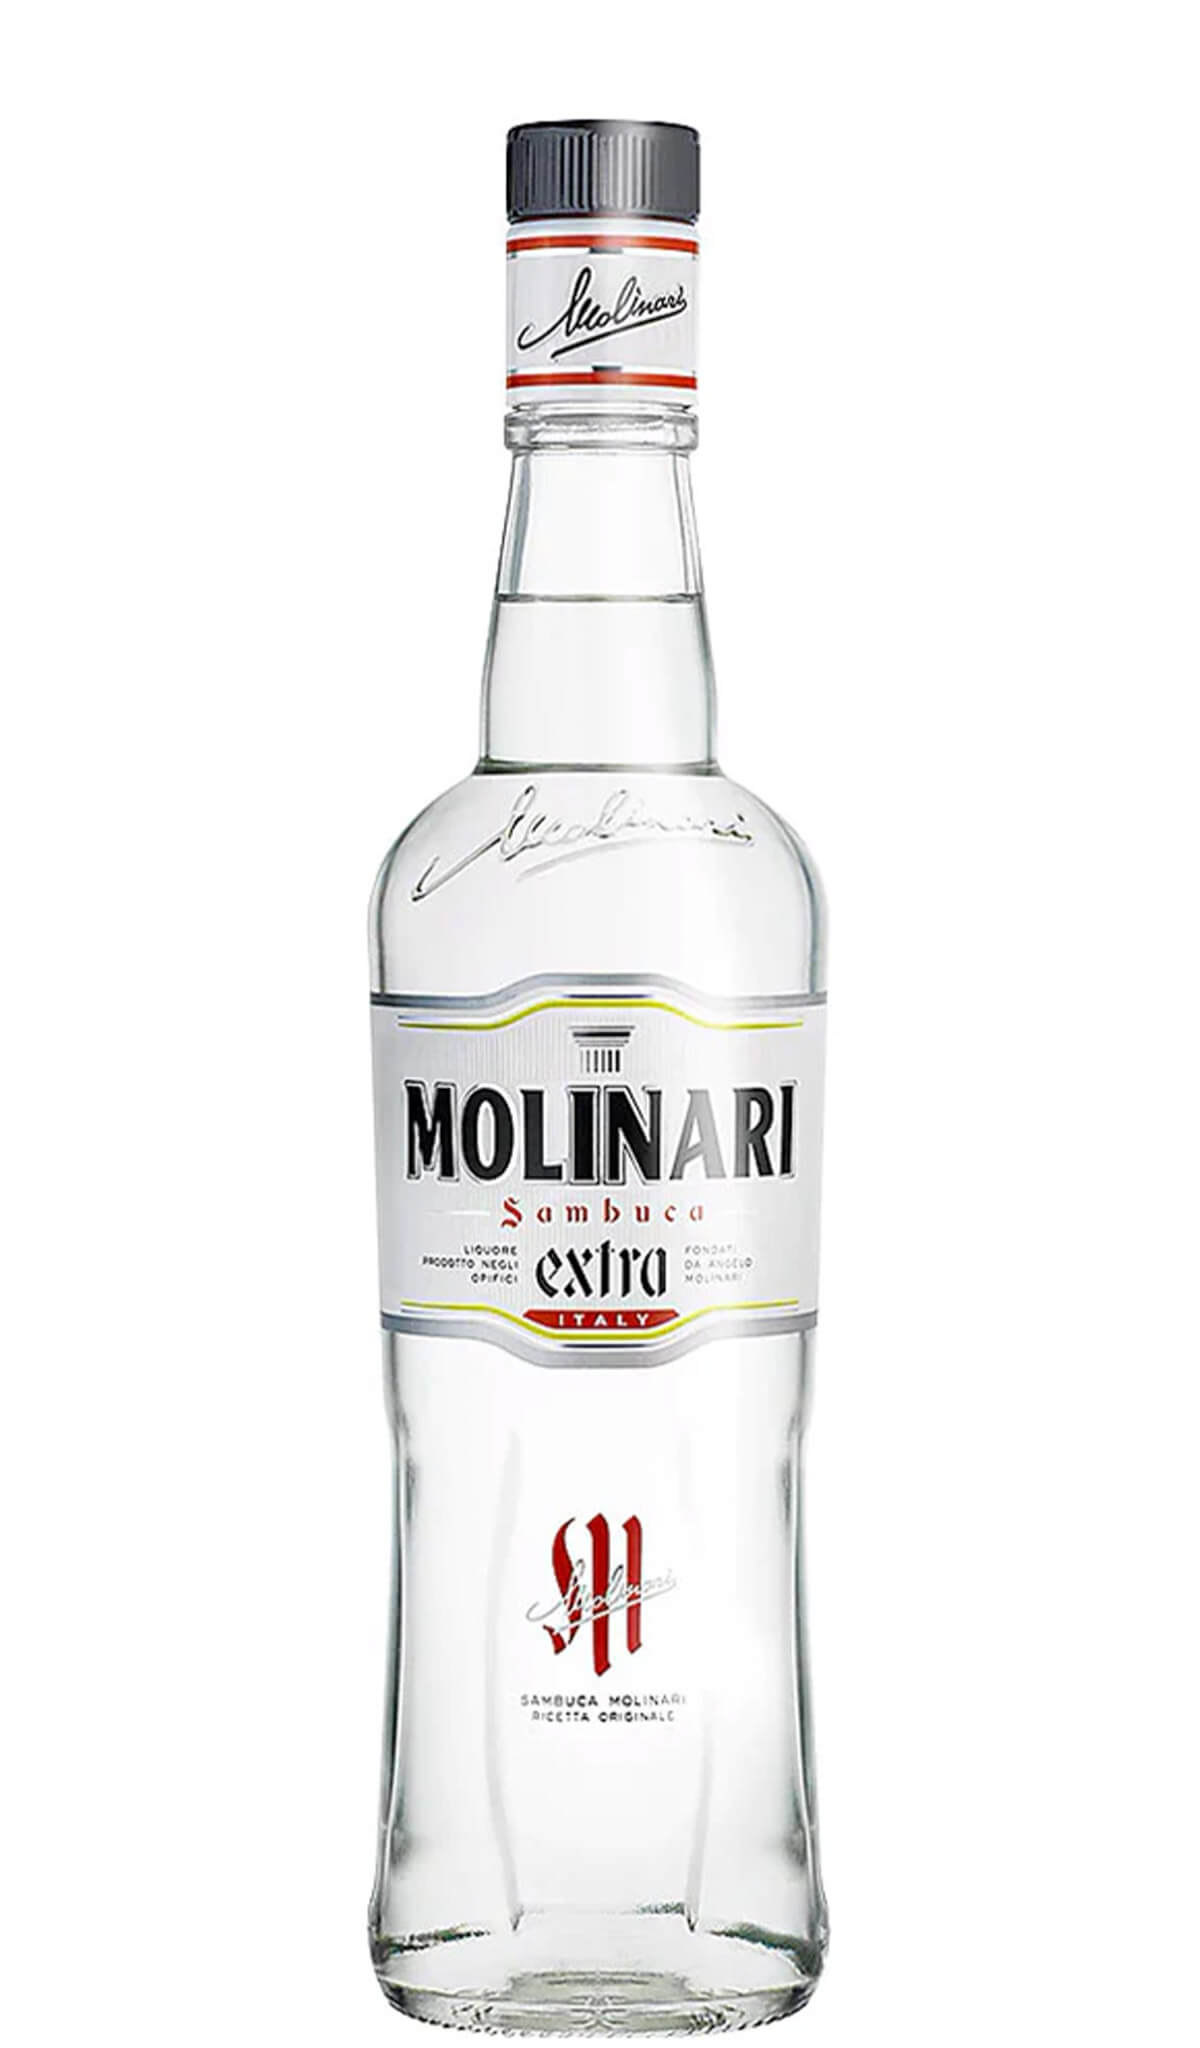 Find out more, explore the range and buy Molinari Sambuca Extra 700mL (Italy) available online at Wine Sellers Direct - Australia's independent liquor specialists.